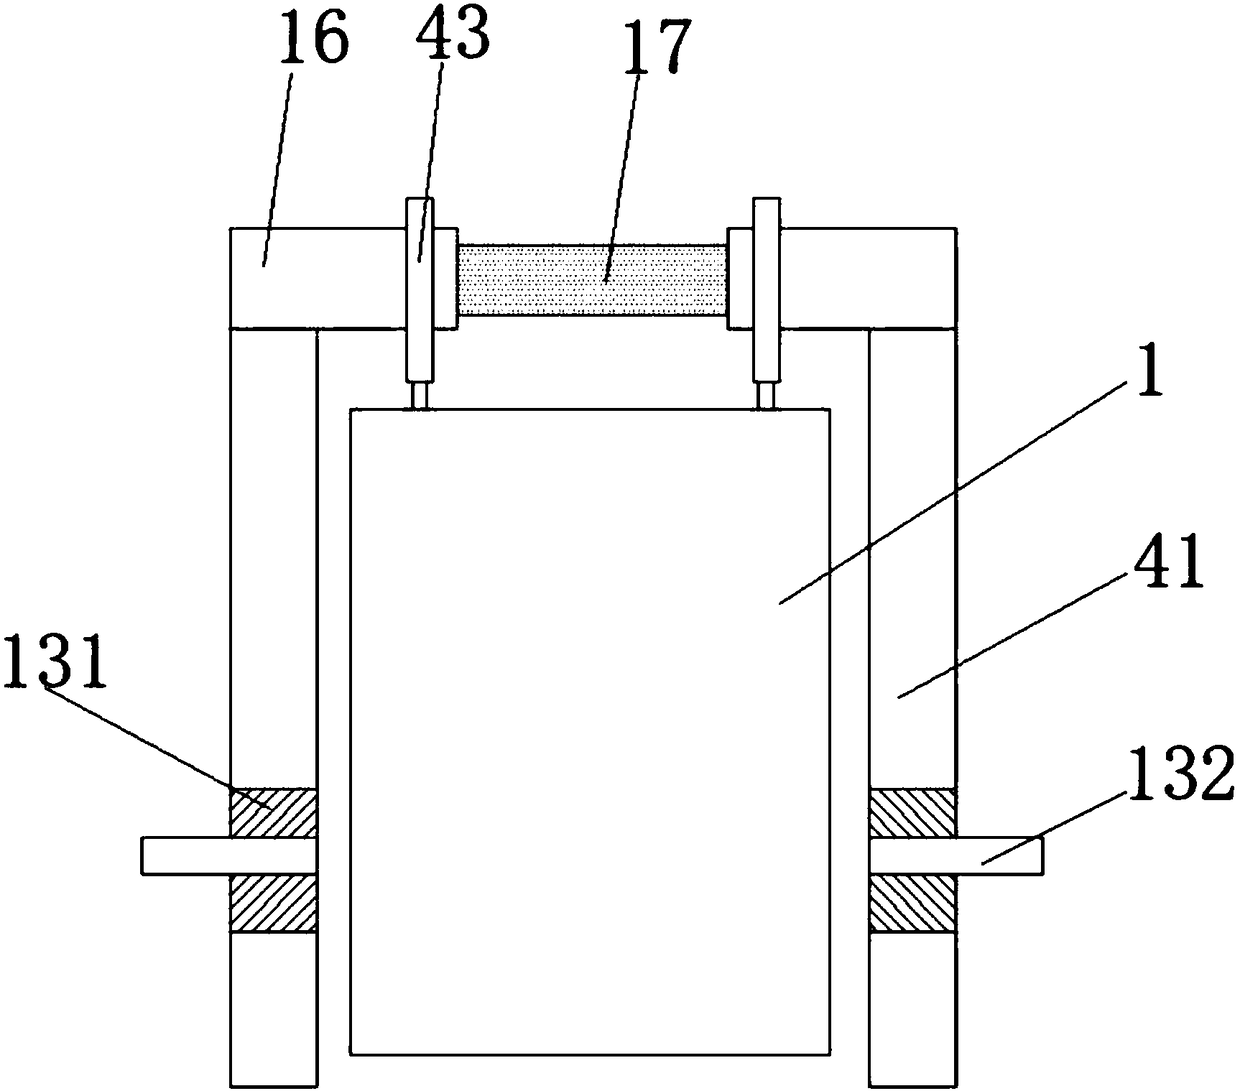 Capacitor aging device